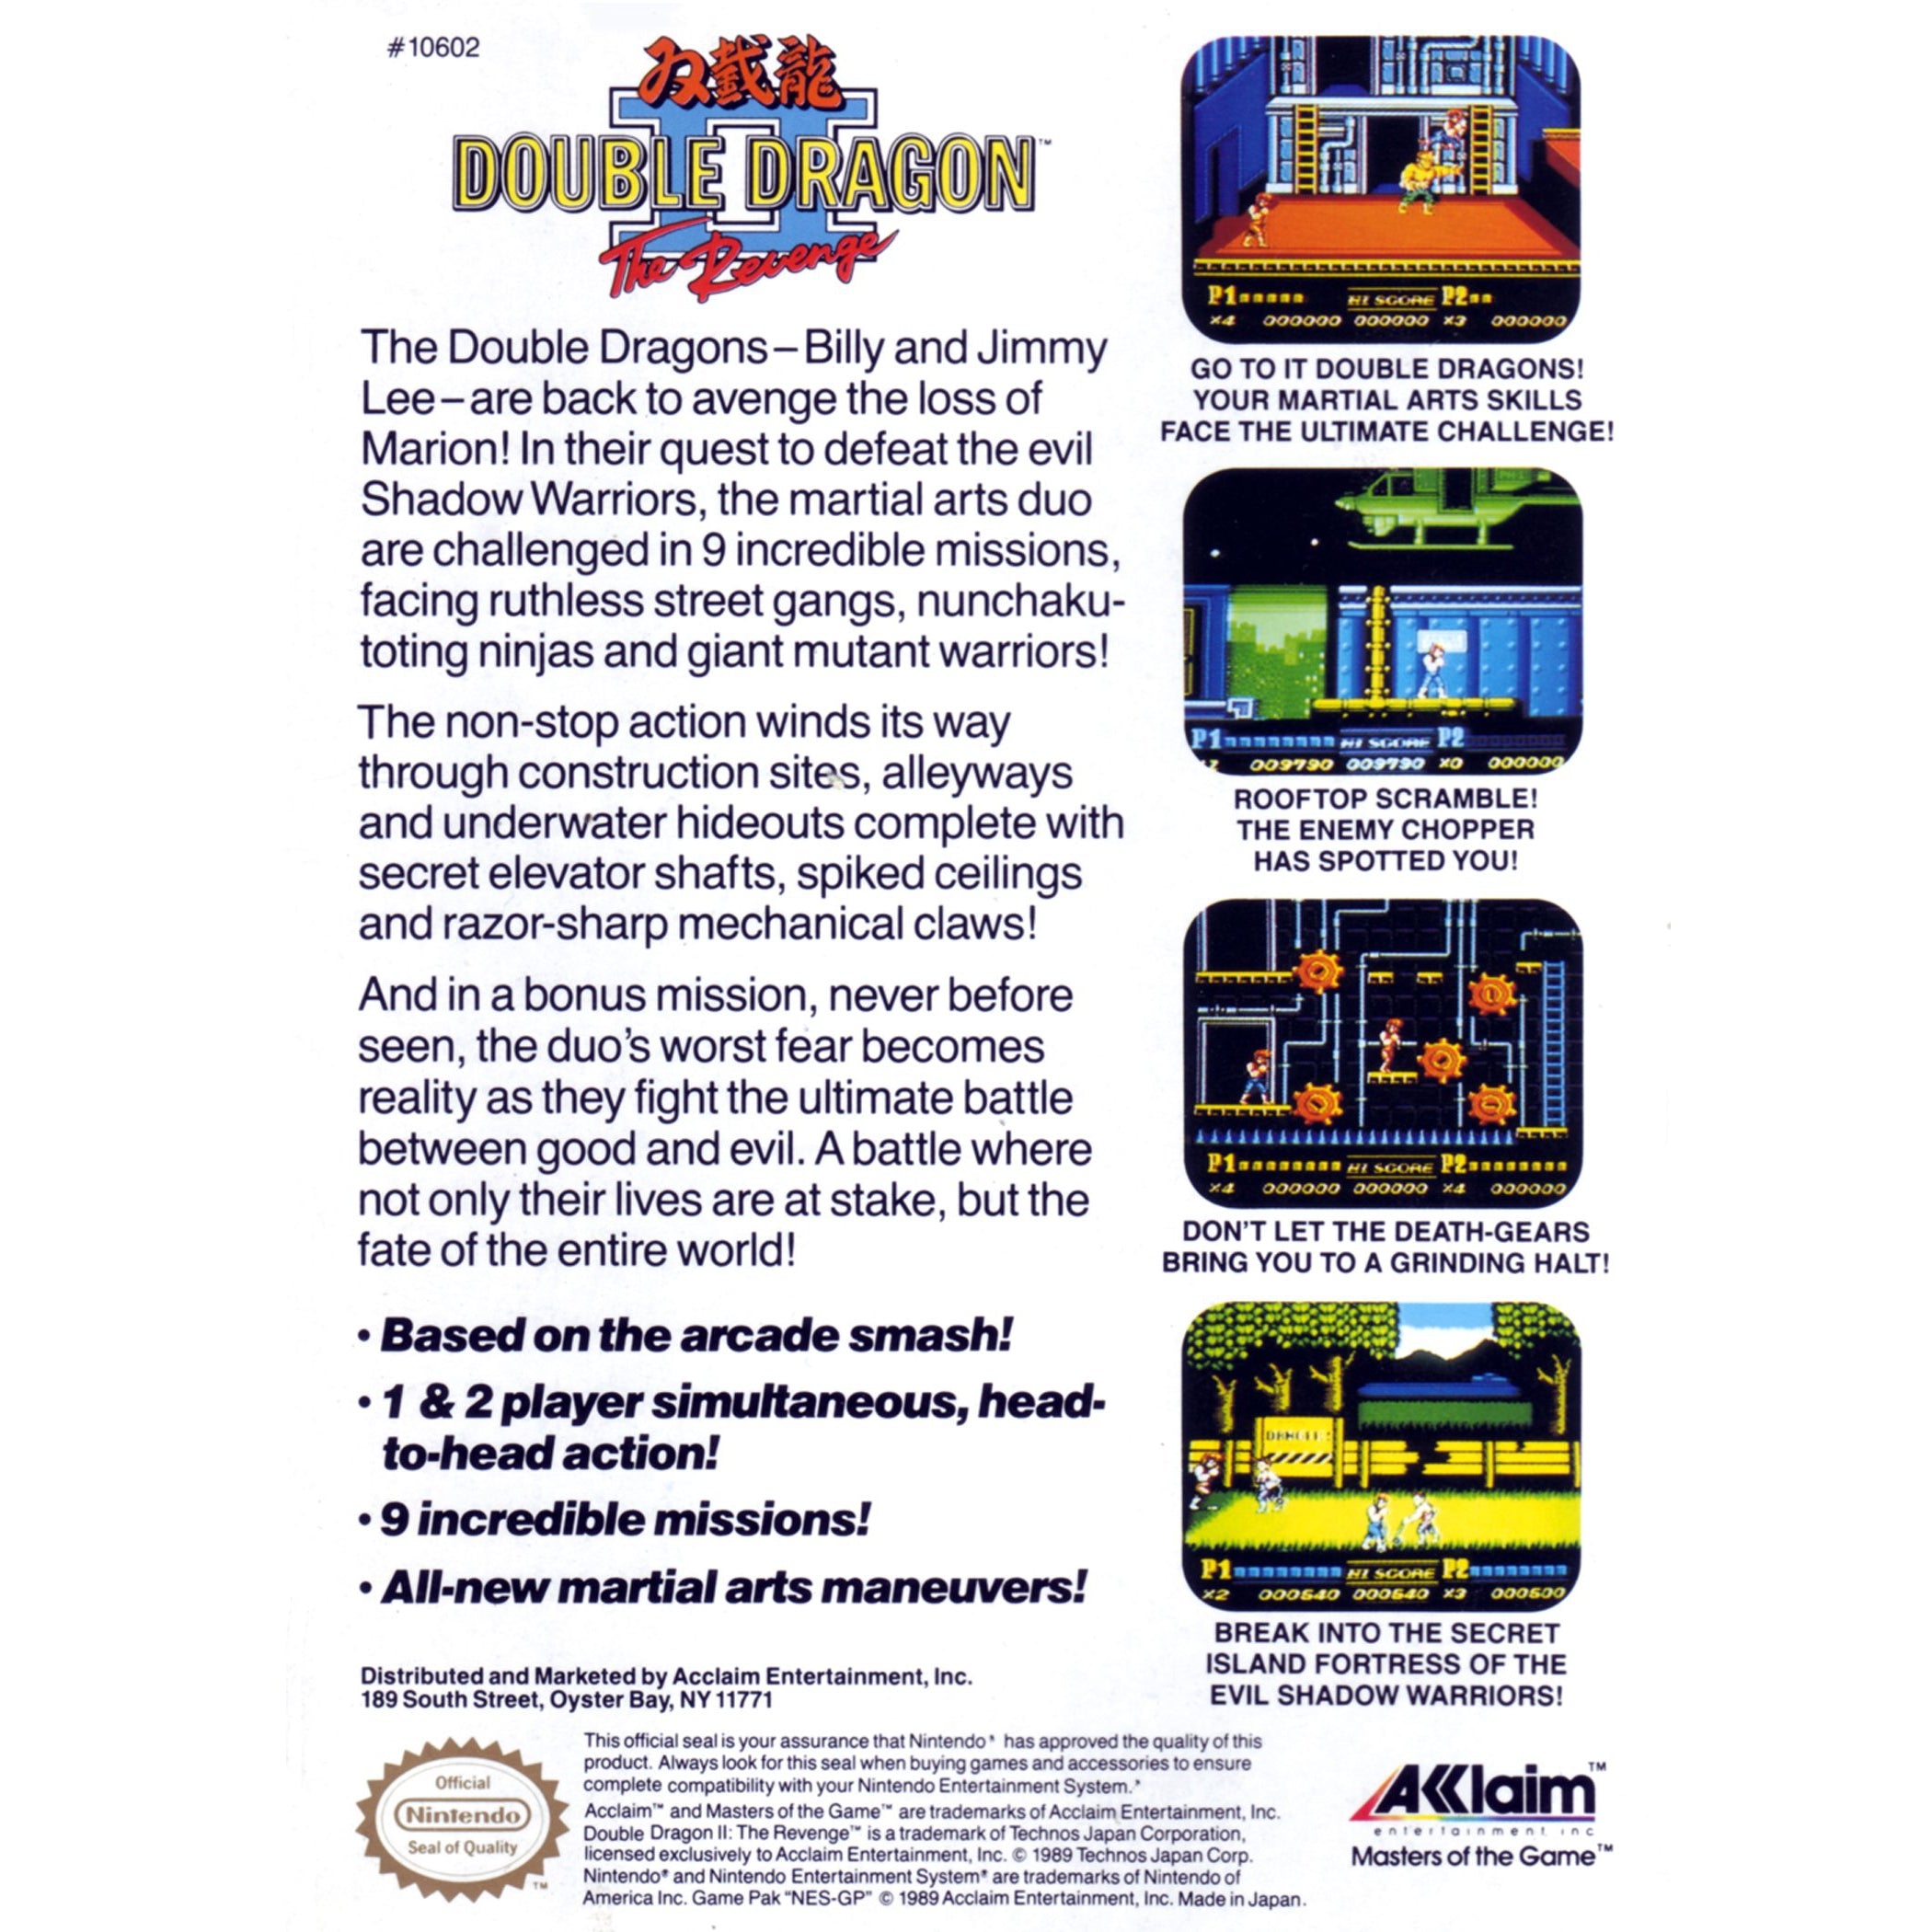 Double Dragon II: The Revenge - Authentic NES Game Cartridge - YourGamingShop.com - Buy, Sell, Trade Video Games Online. 120 Day Warranty. Satisfaction Guaranteed.